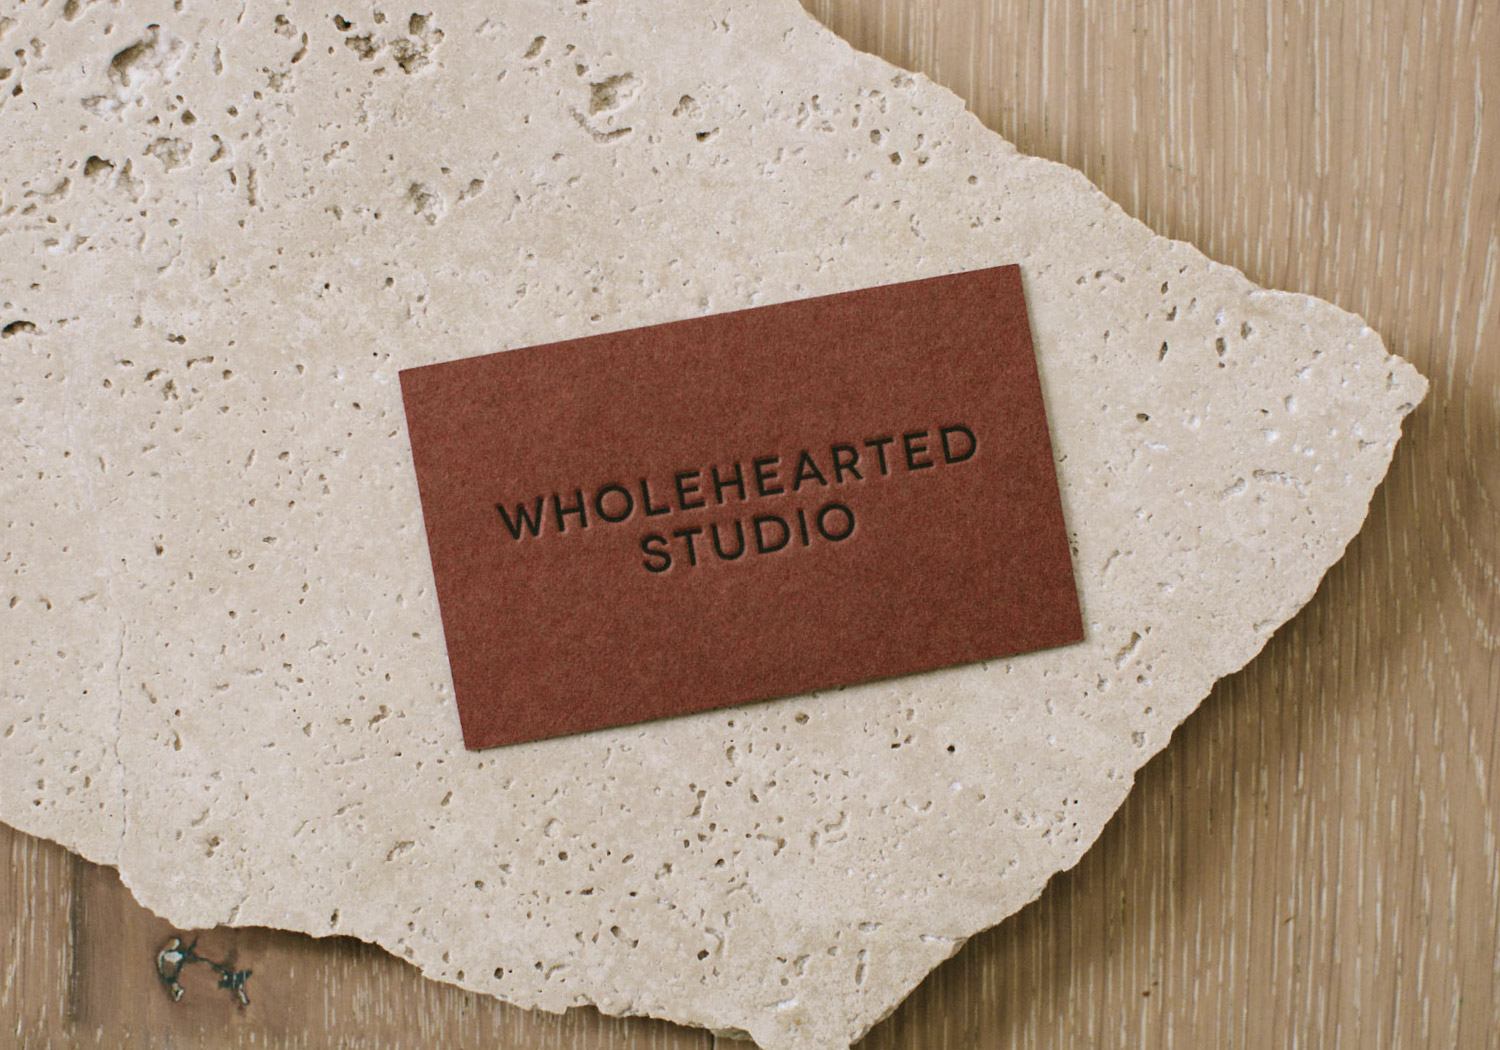 Brown business card with black letterpress Wholehearted Studio logo